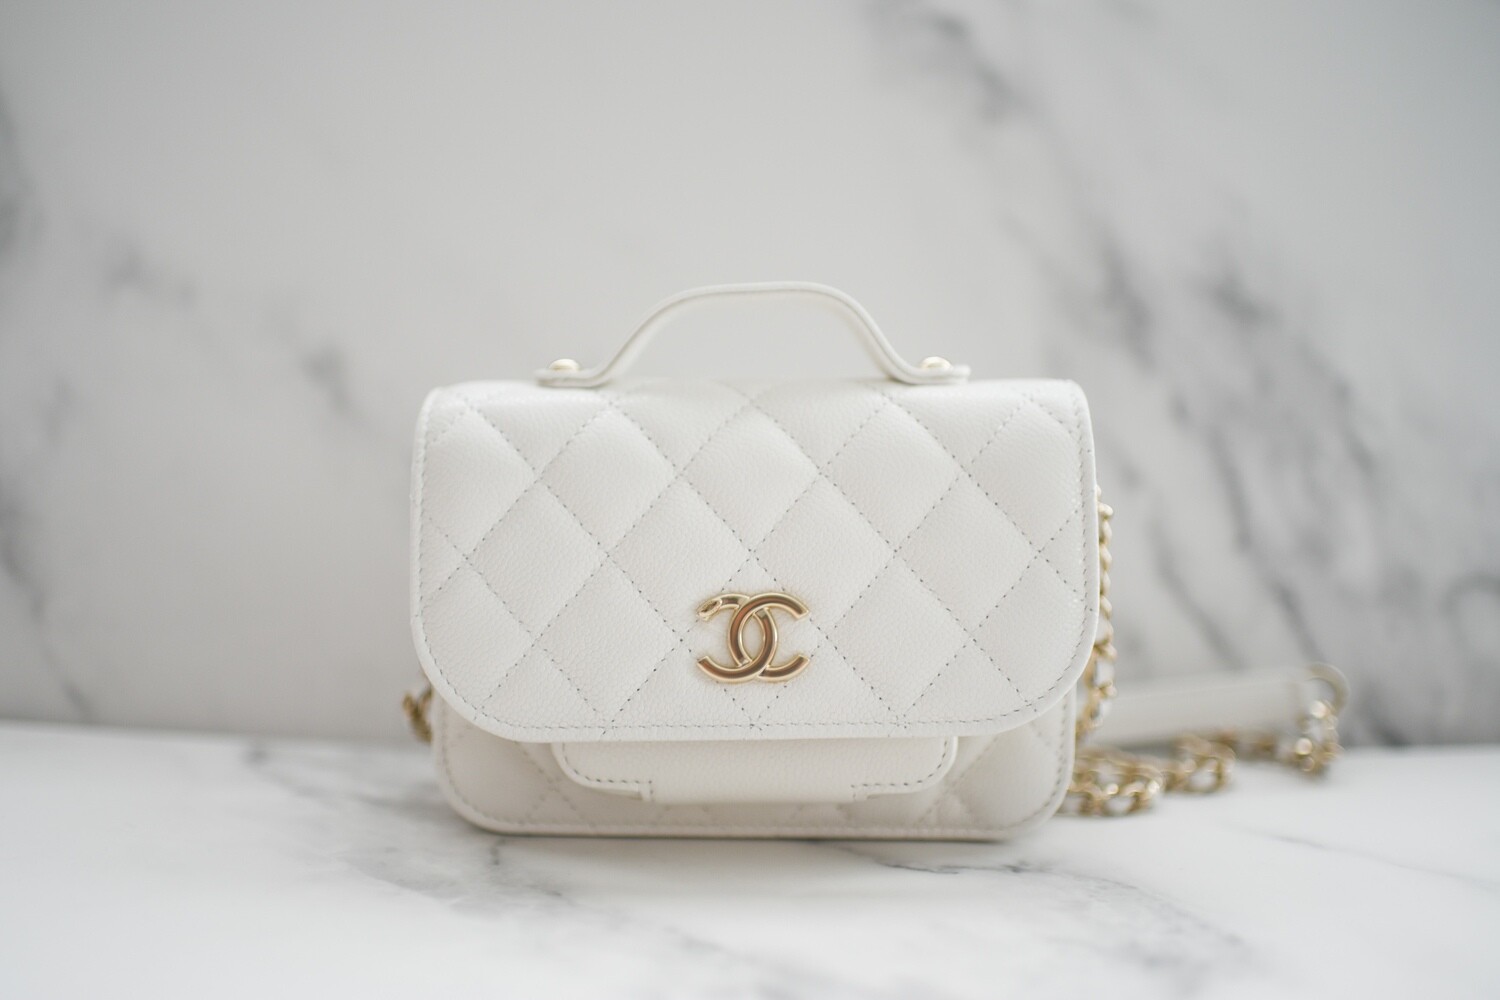 Chanel Business Affinity Clutch with Chain, White Caviar Leather with Gold  Hardware, New in Box WA001